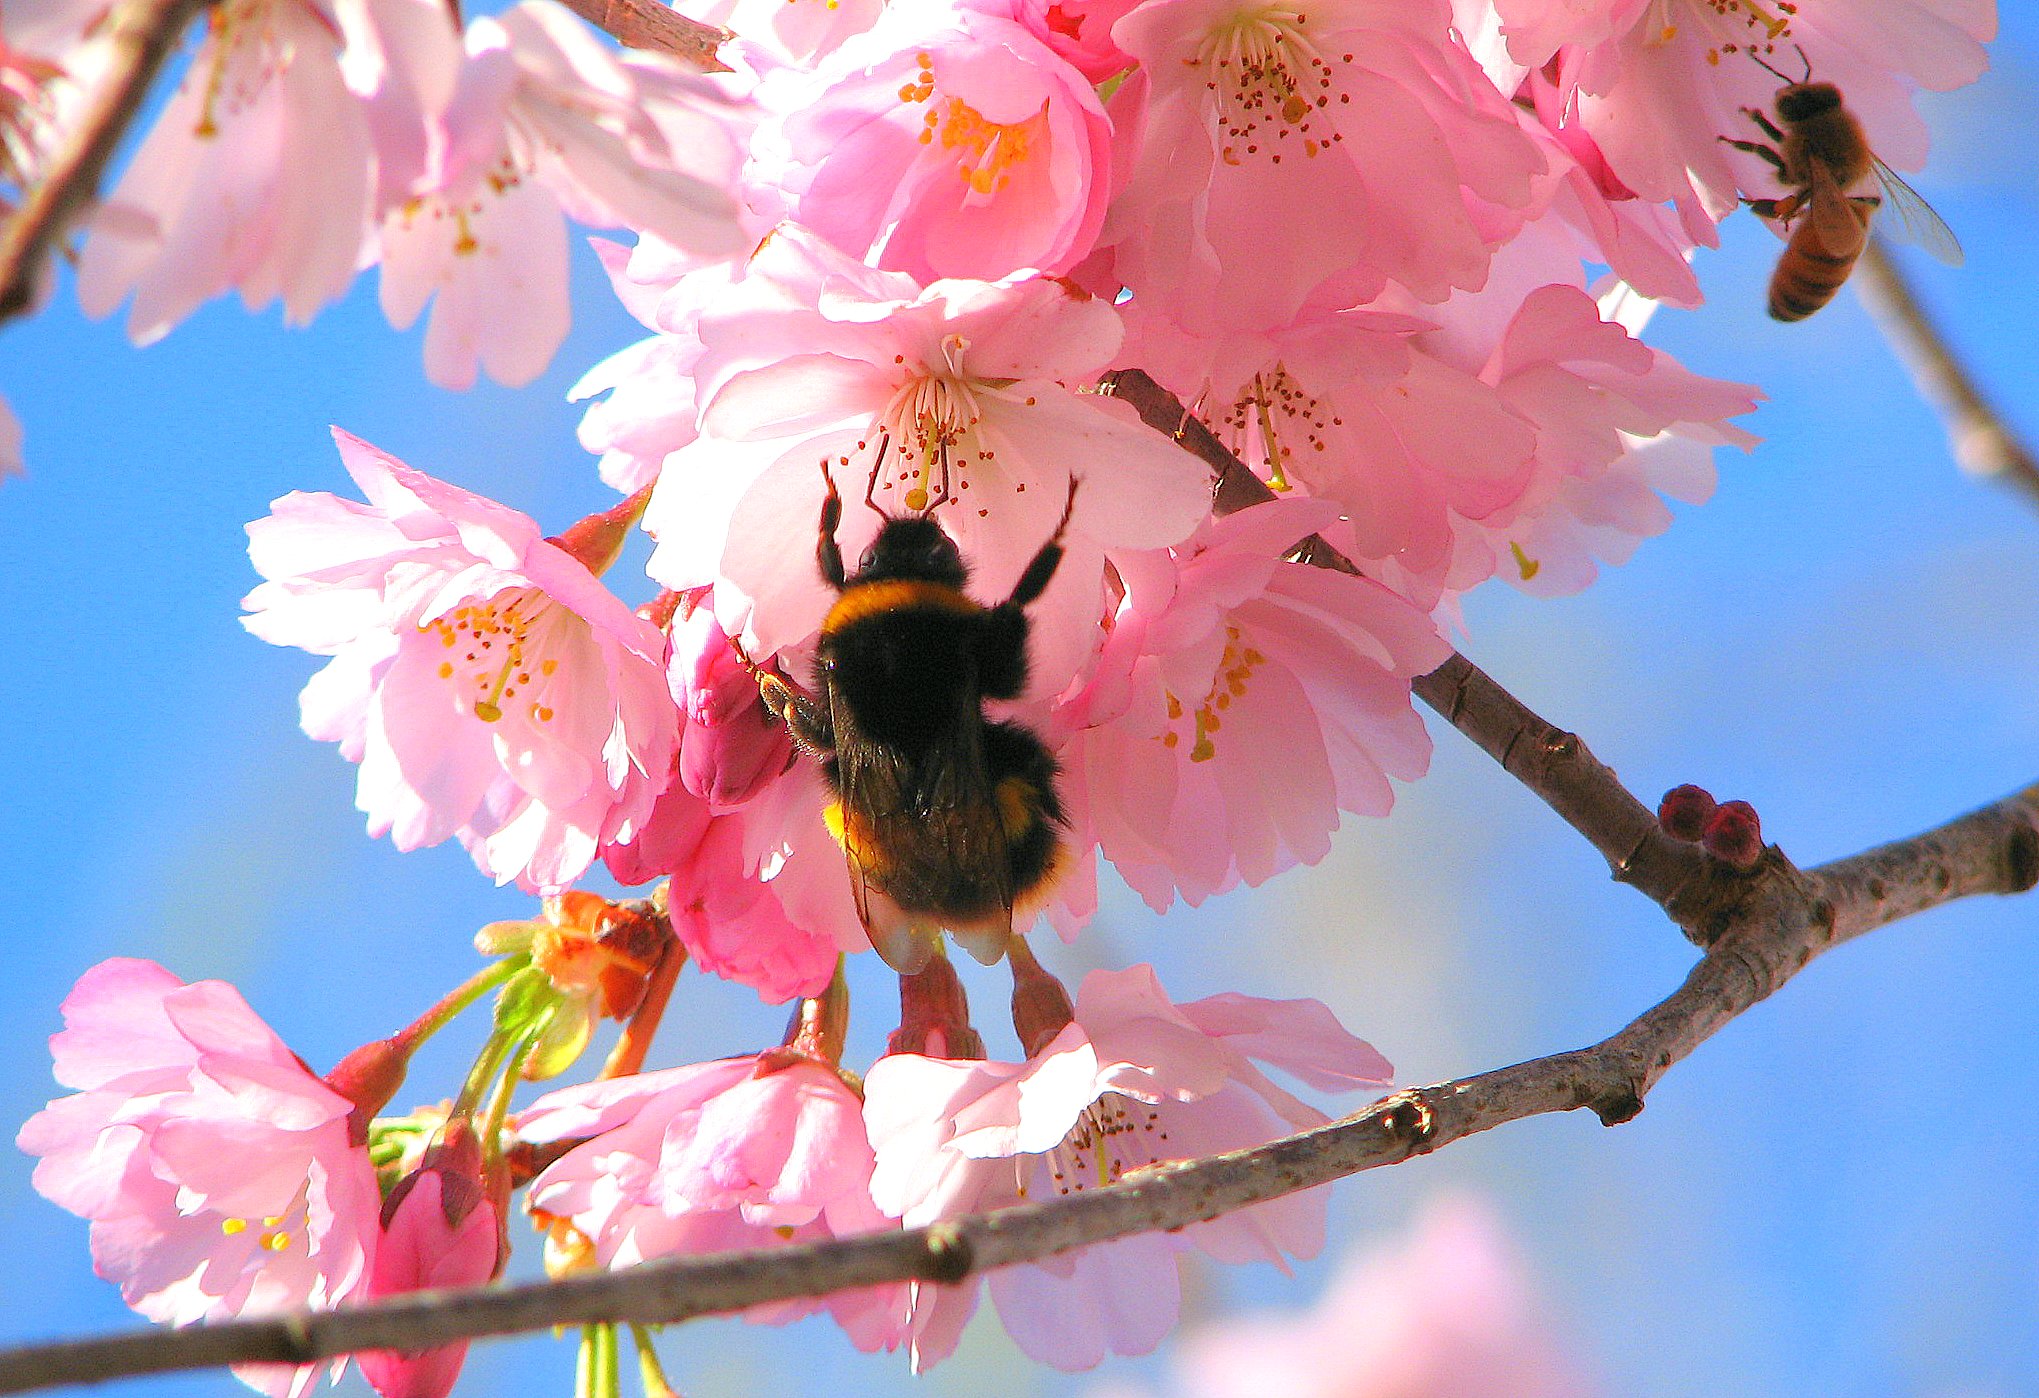 Bee in close-up view with vibrant floral background.